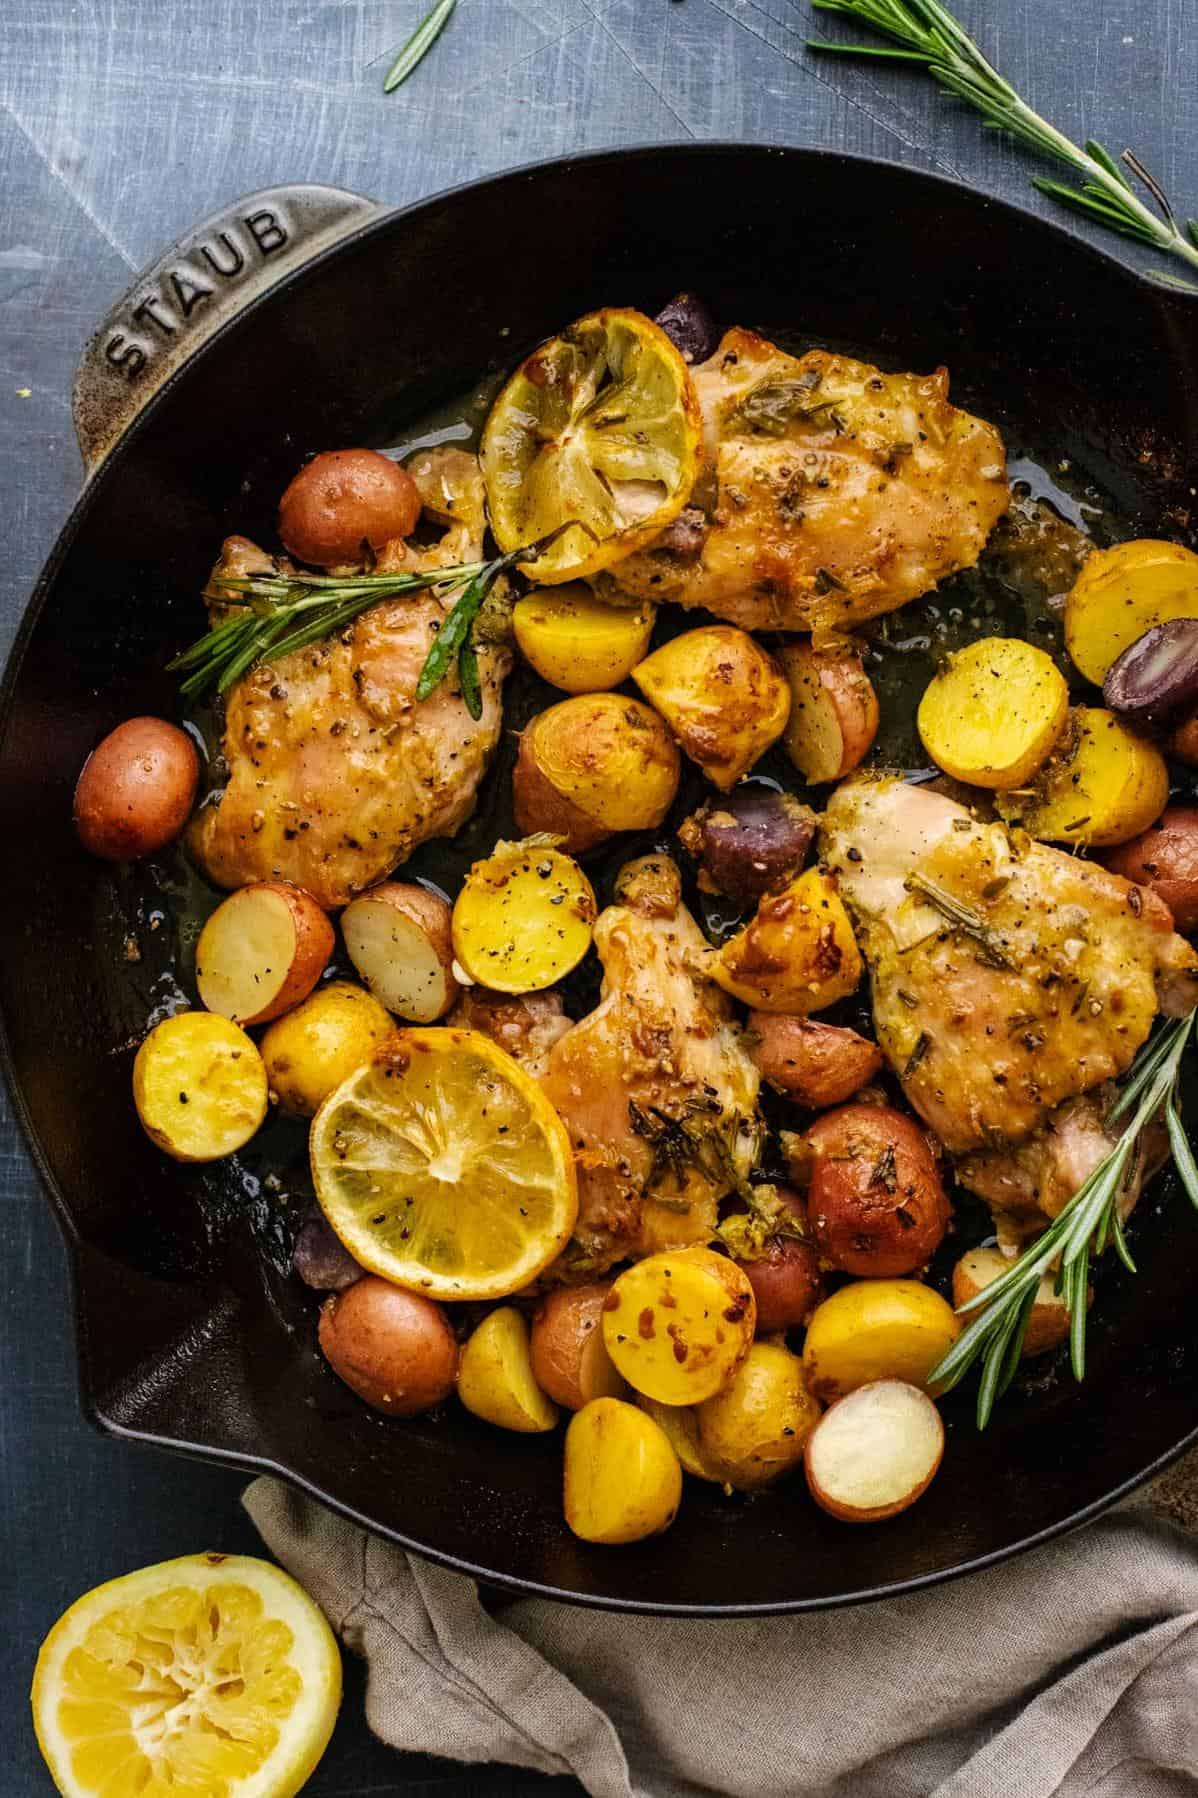  Elevate your weeknight dinner with this flavorful baked chicken